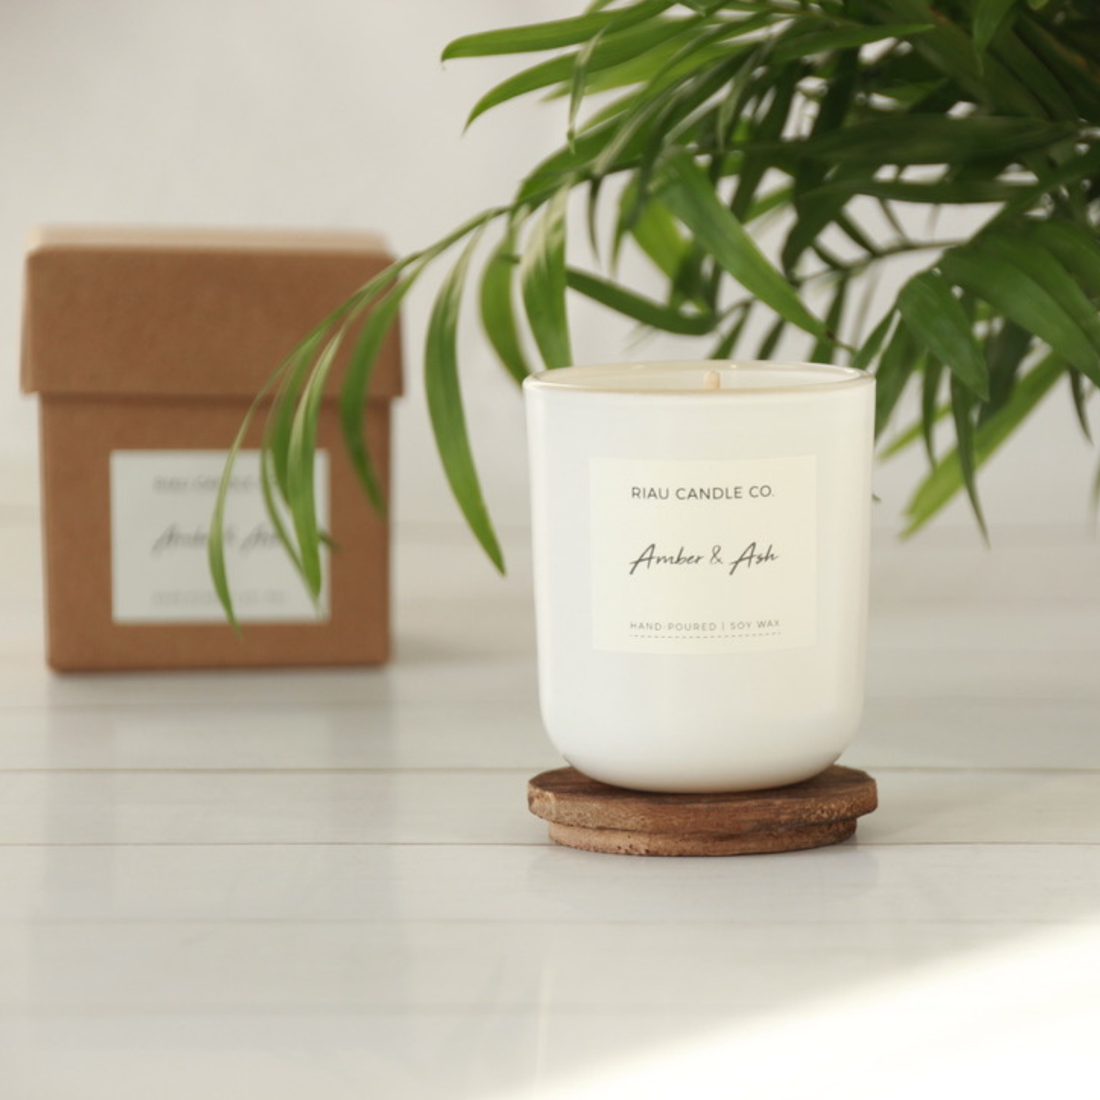 Candle fair trade ethical sustainable fashion Scented Soy Candles - Amber & Ash conscious purchase Riau Candle Company